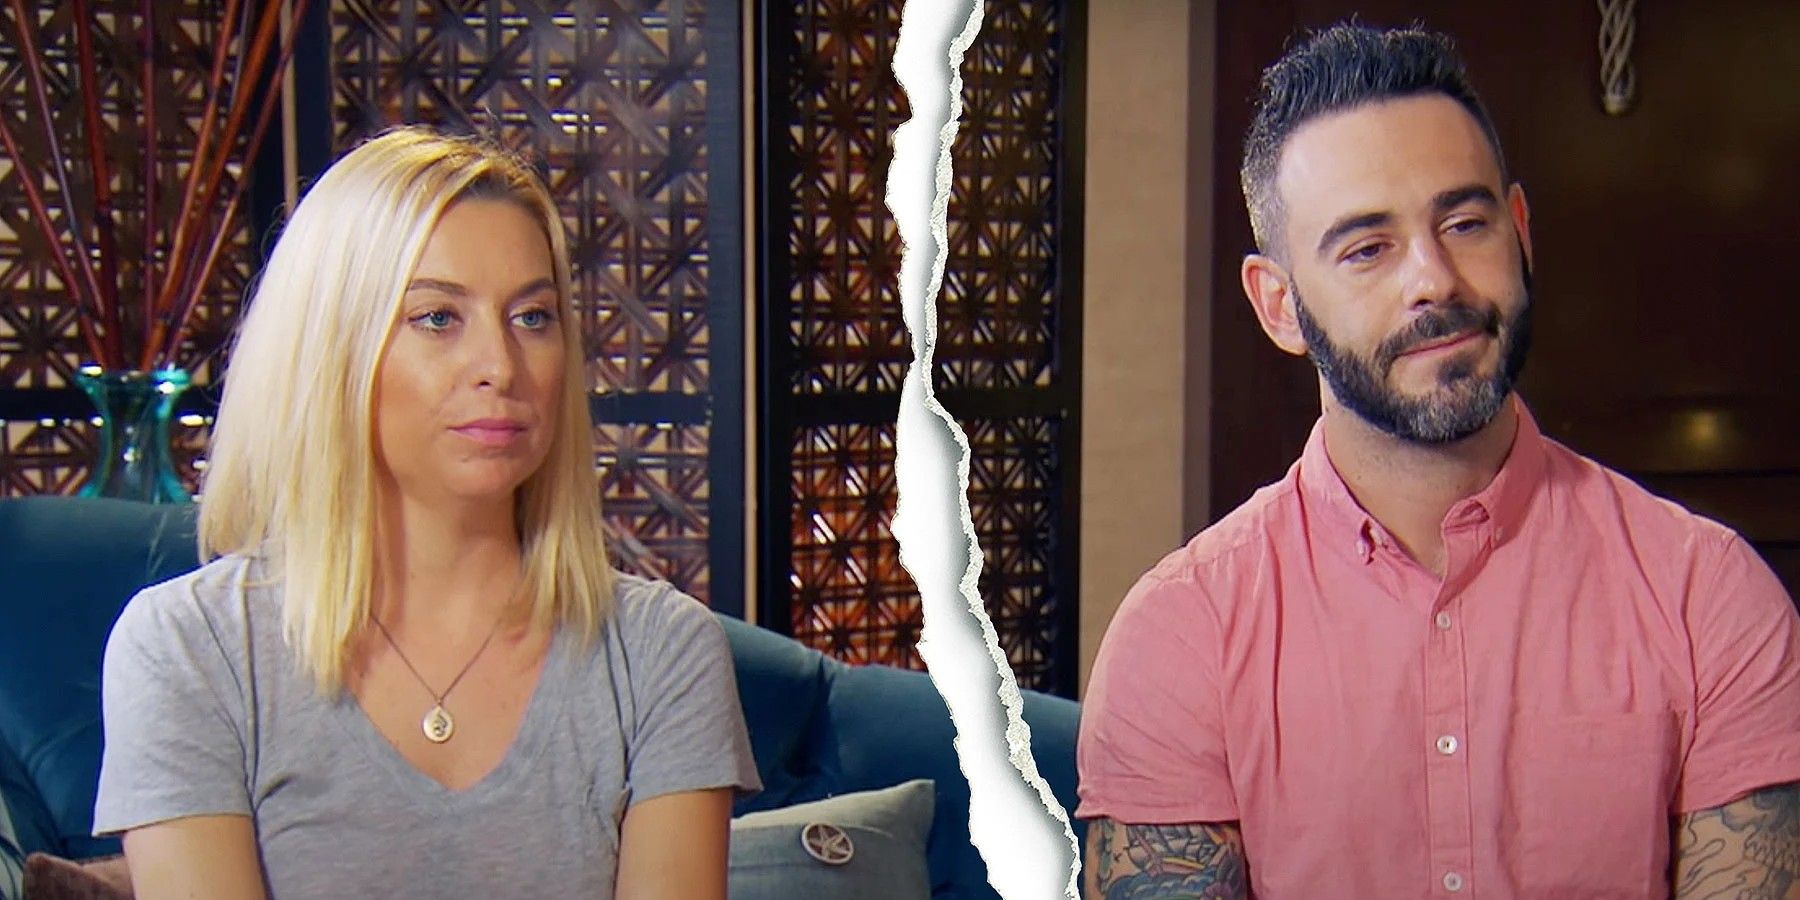 heather derek married at first sight image with division to indicate divorce MAFS